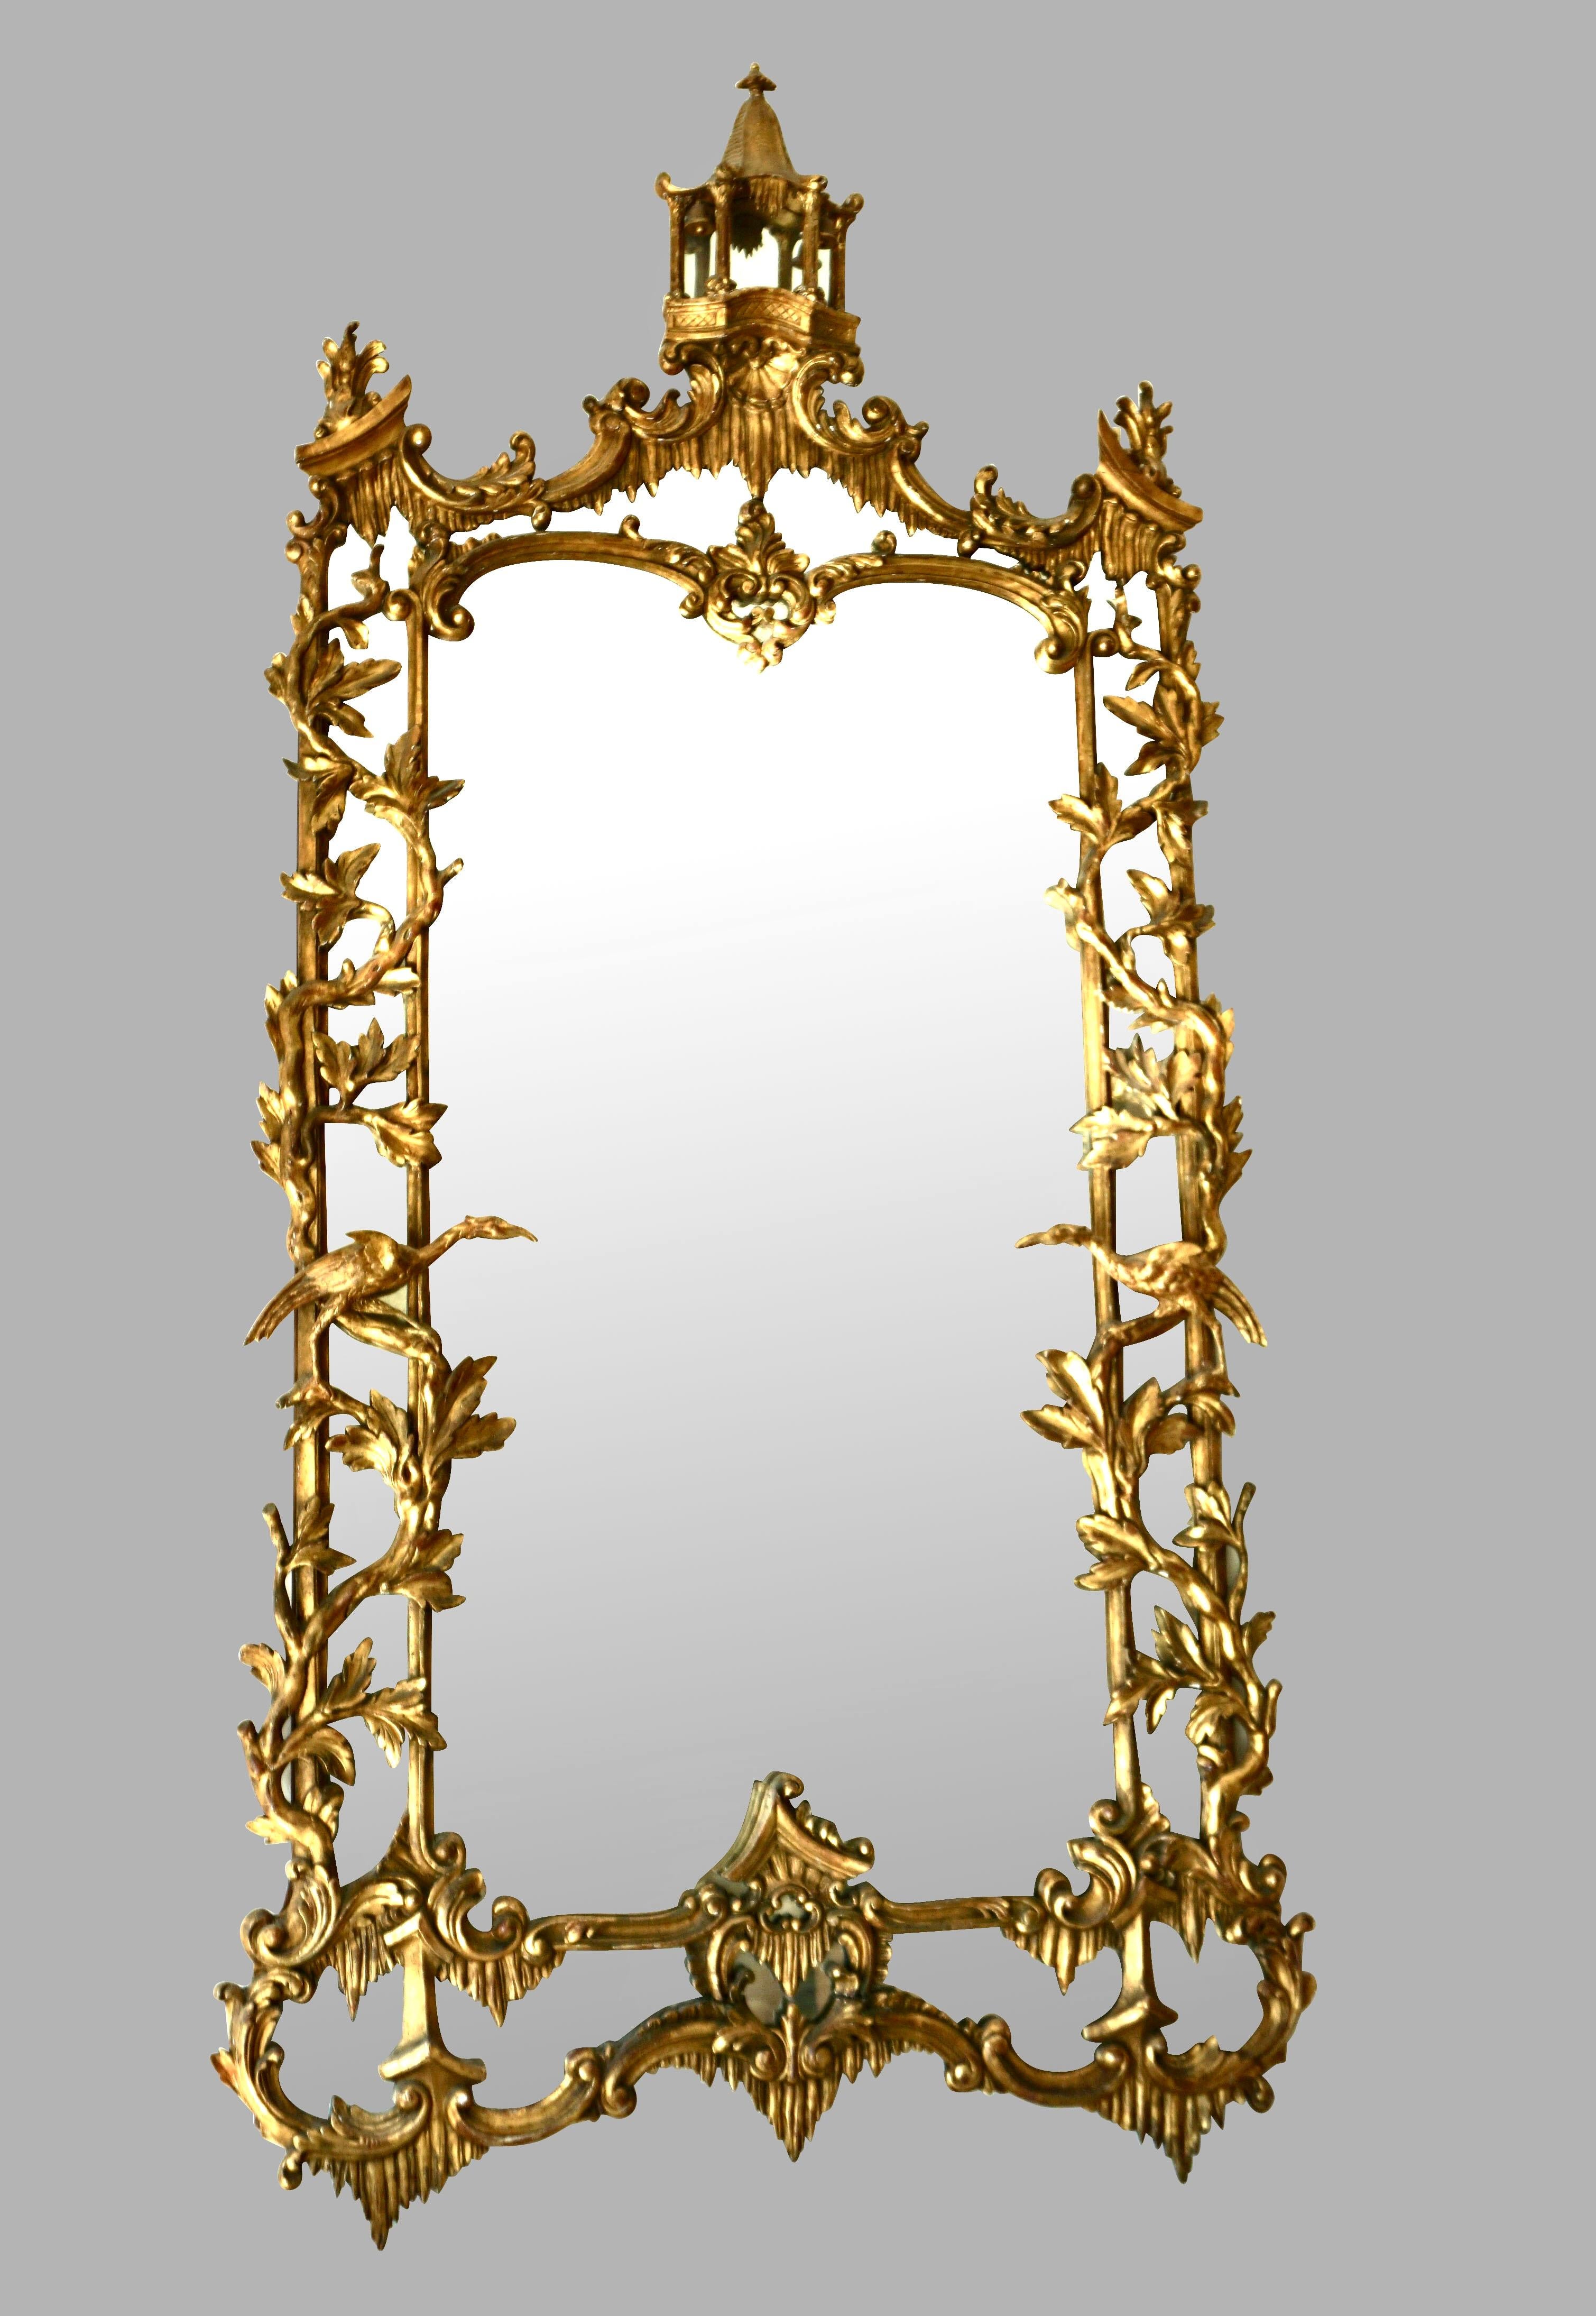 This is a lovely large Chinese Chippendale mirror of excellent quality. The central mirror plate is topped by a charming carved pagoda, the perimeter is decorated with leaves and branches with perched well-carved ho-ho birds on each side. The main